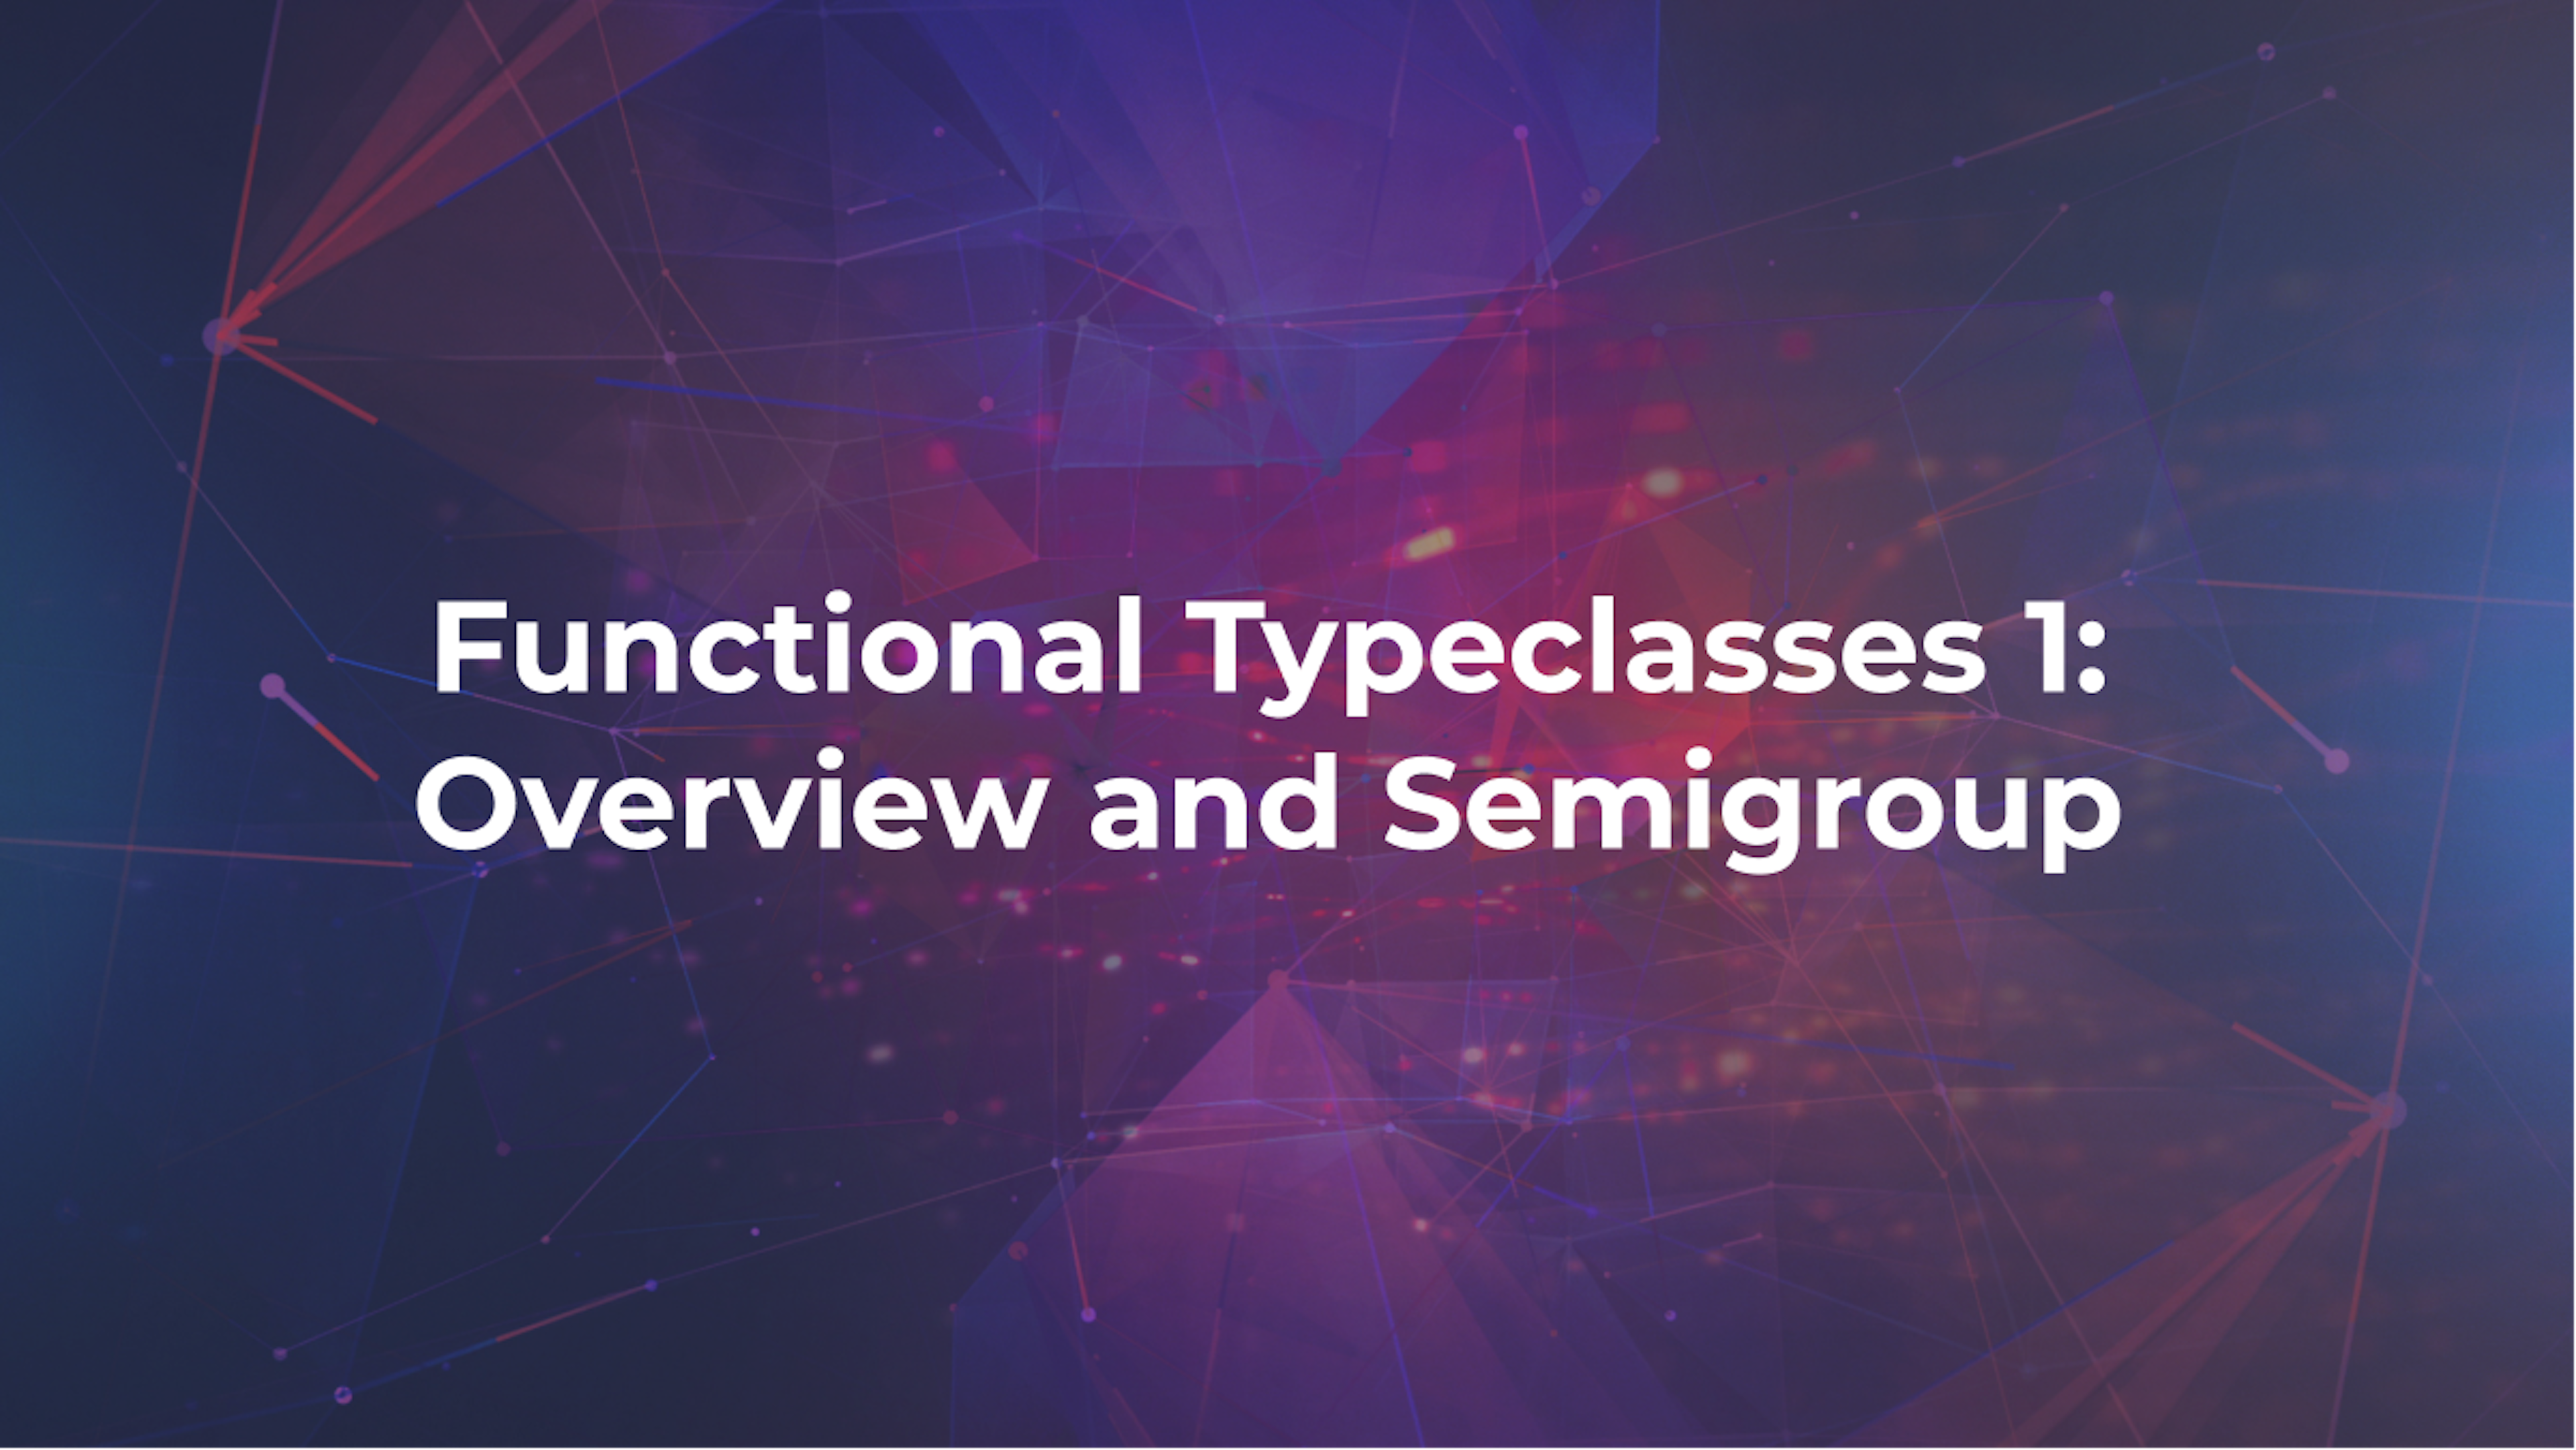 Functional Typeclasses 1: Overview and Semigroup